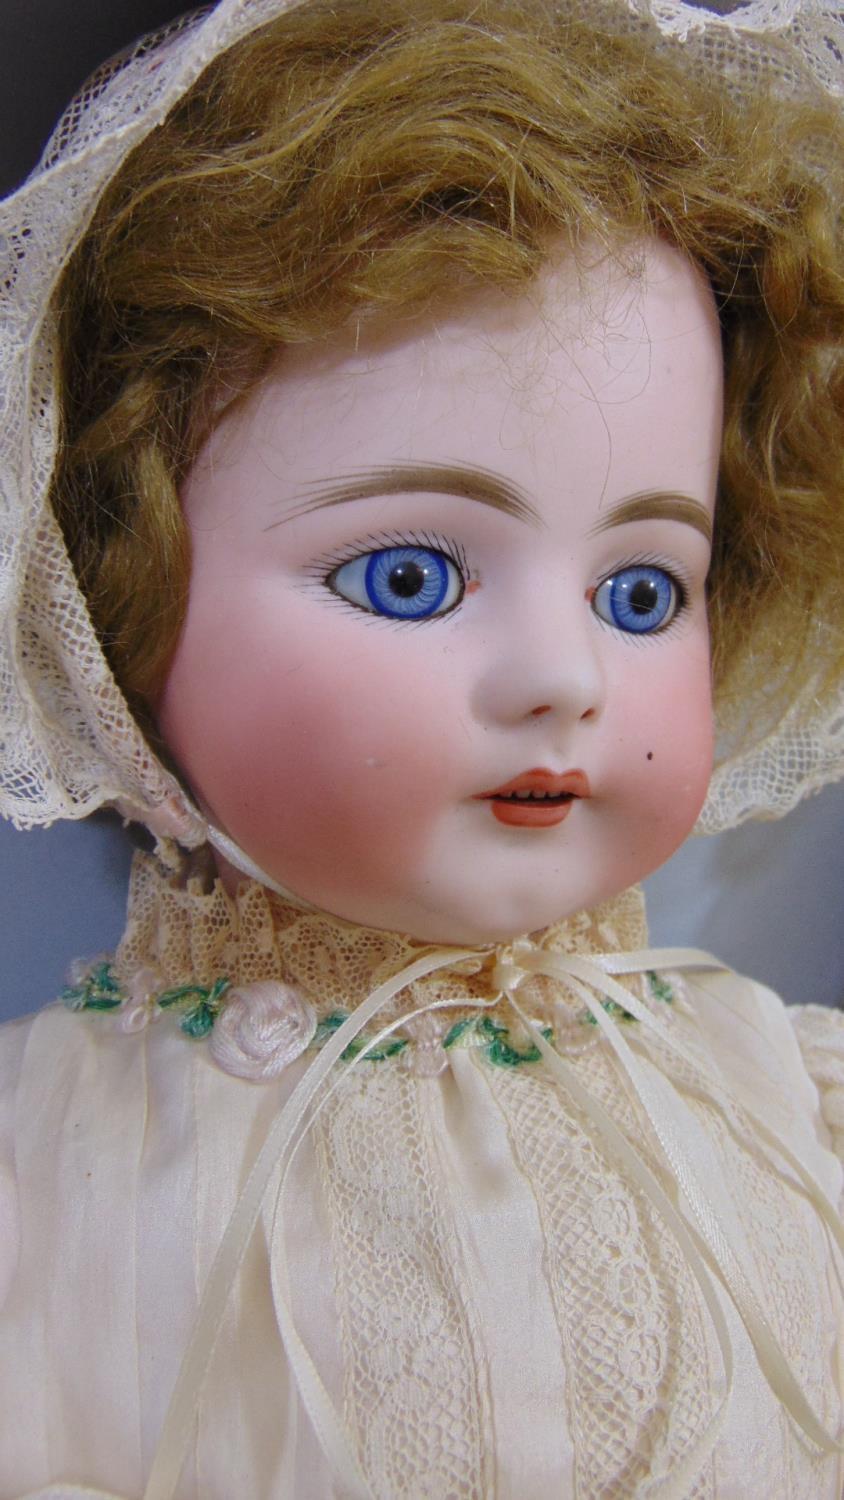 2 circa 1920's bisque head dolls both with jointed composition bodies, fixed blue eyes,open mouth - Image 2 of 8